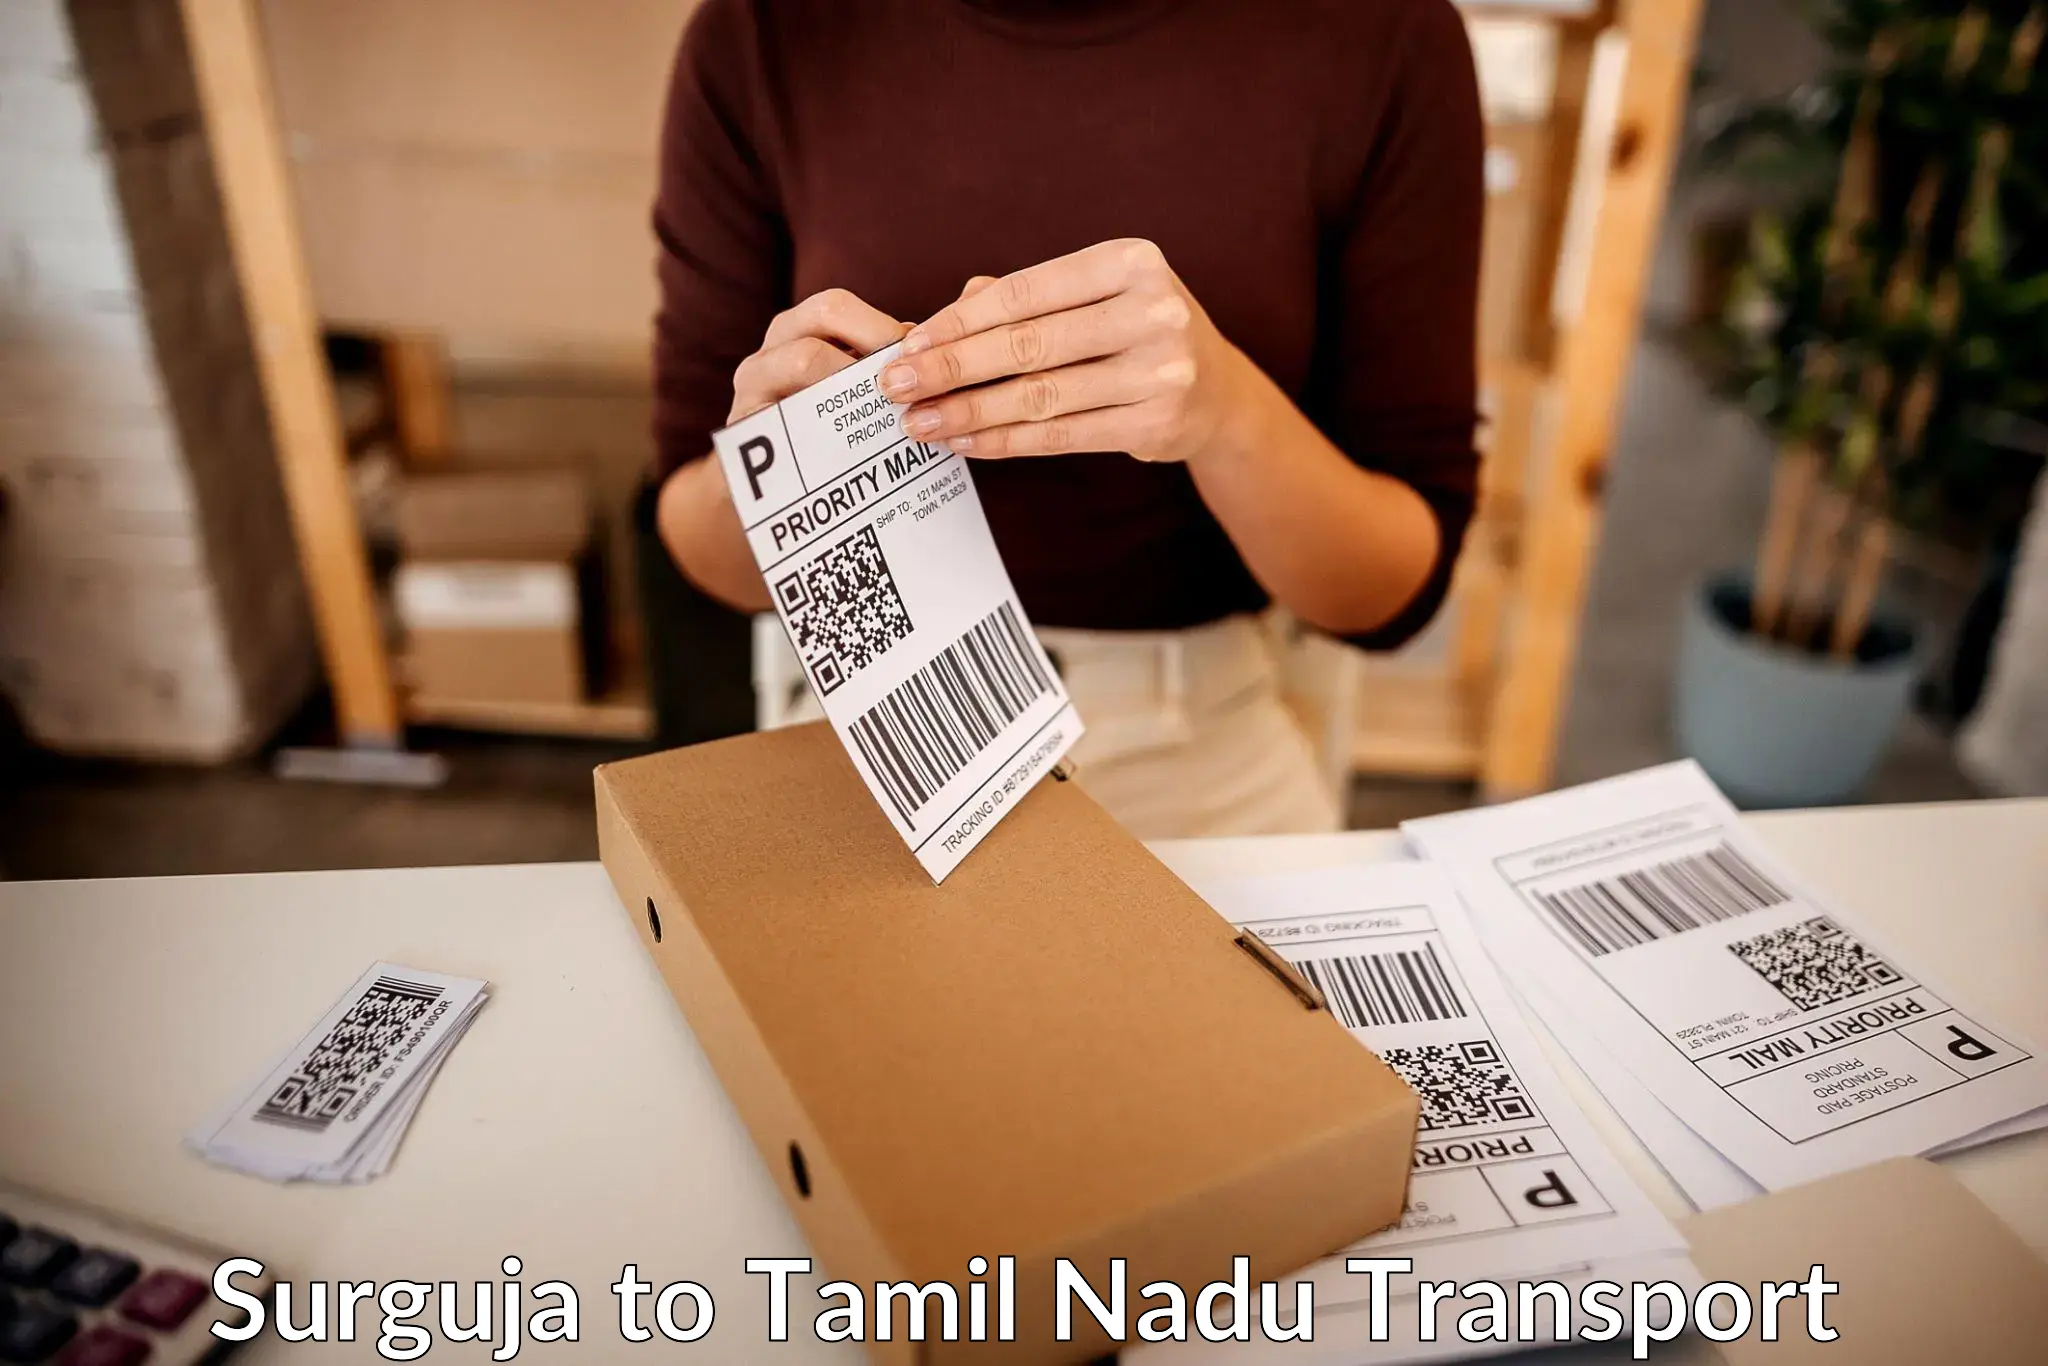 Daily parcel service transport Surguja to Coonoor